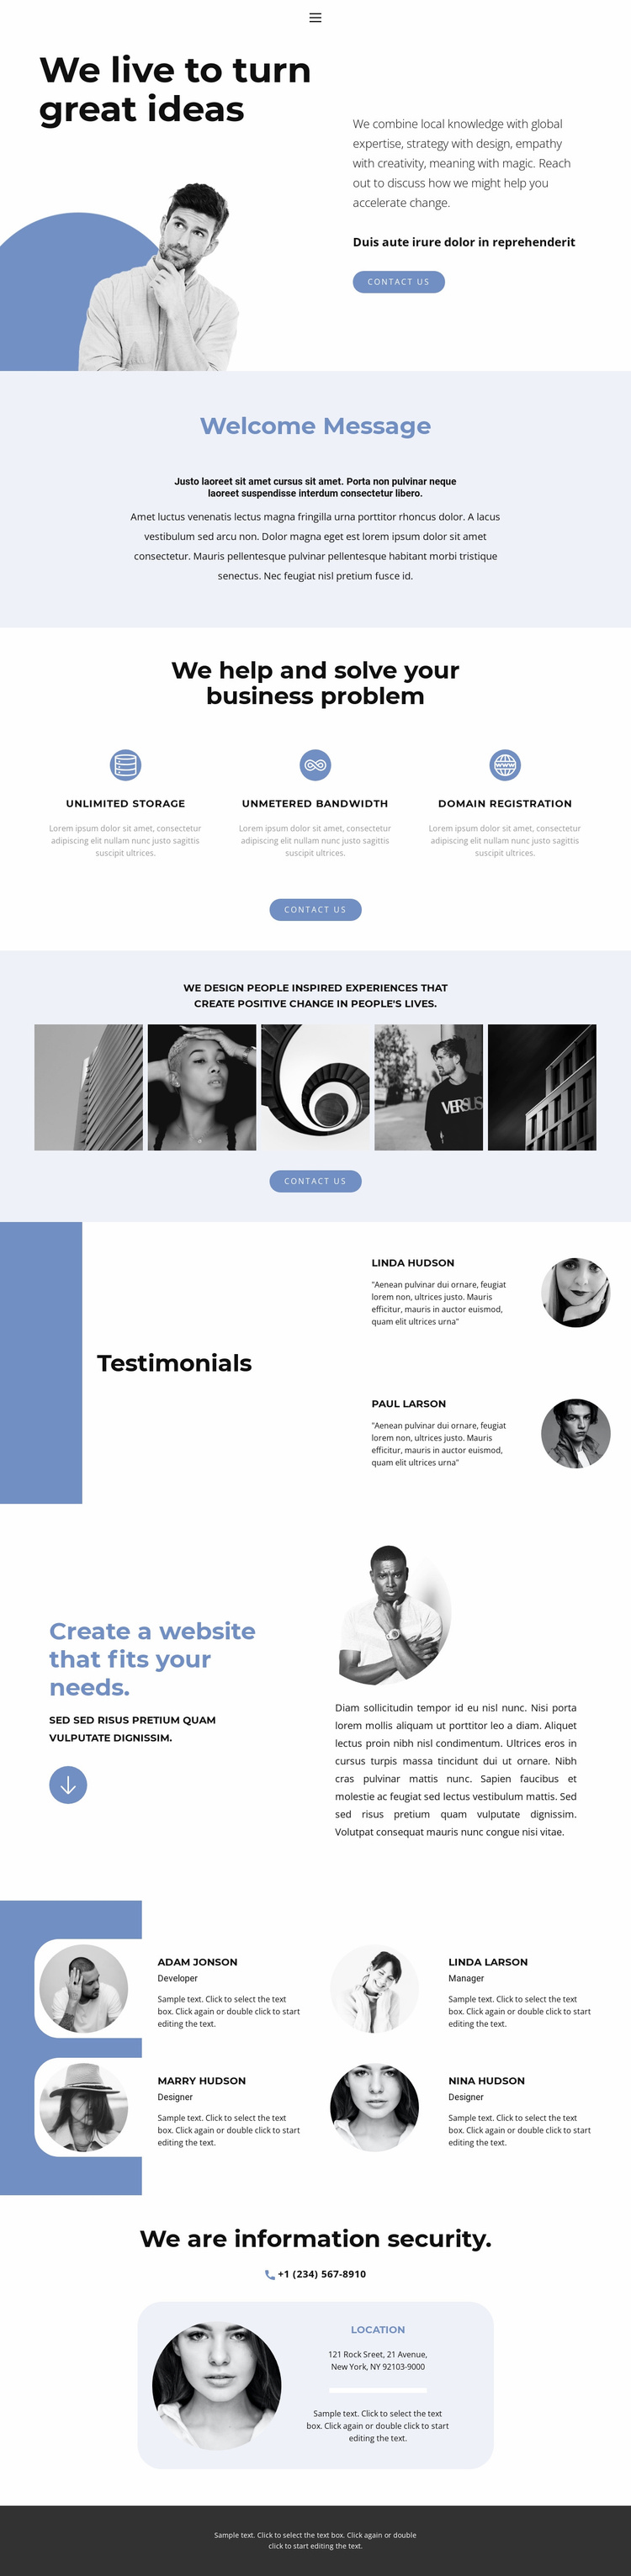 The embodiment of bold ideas Website Template